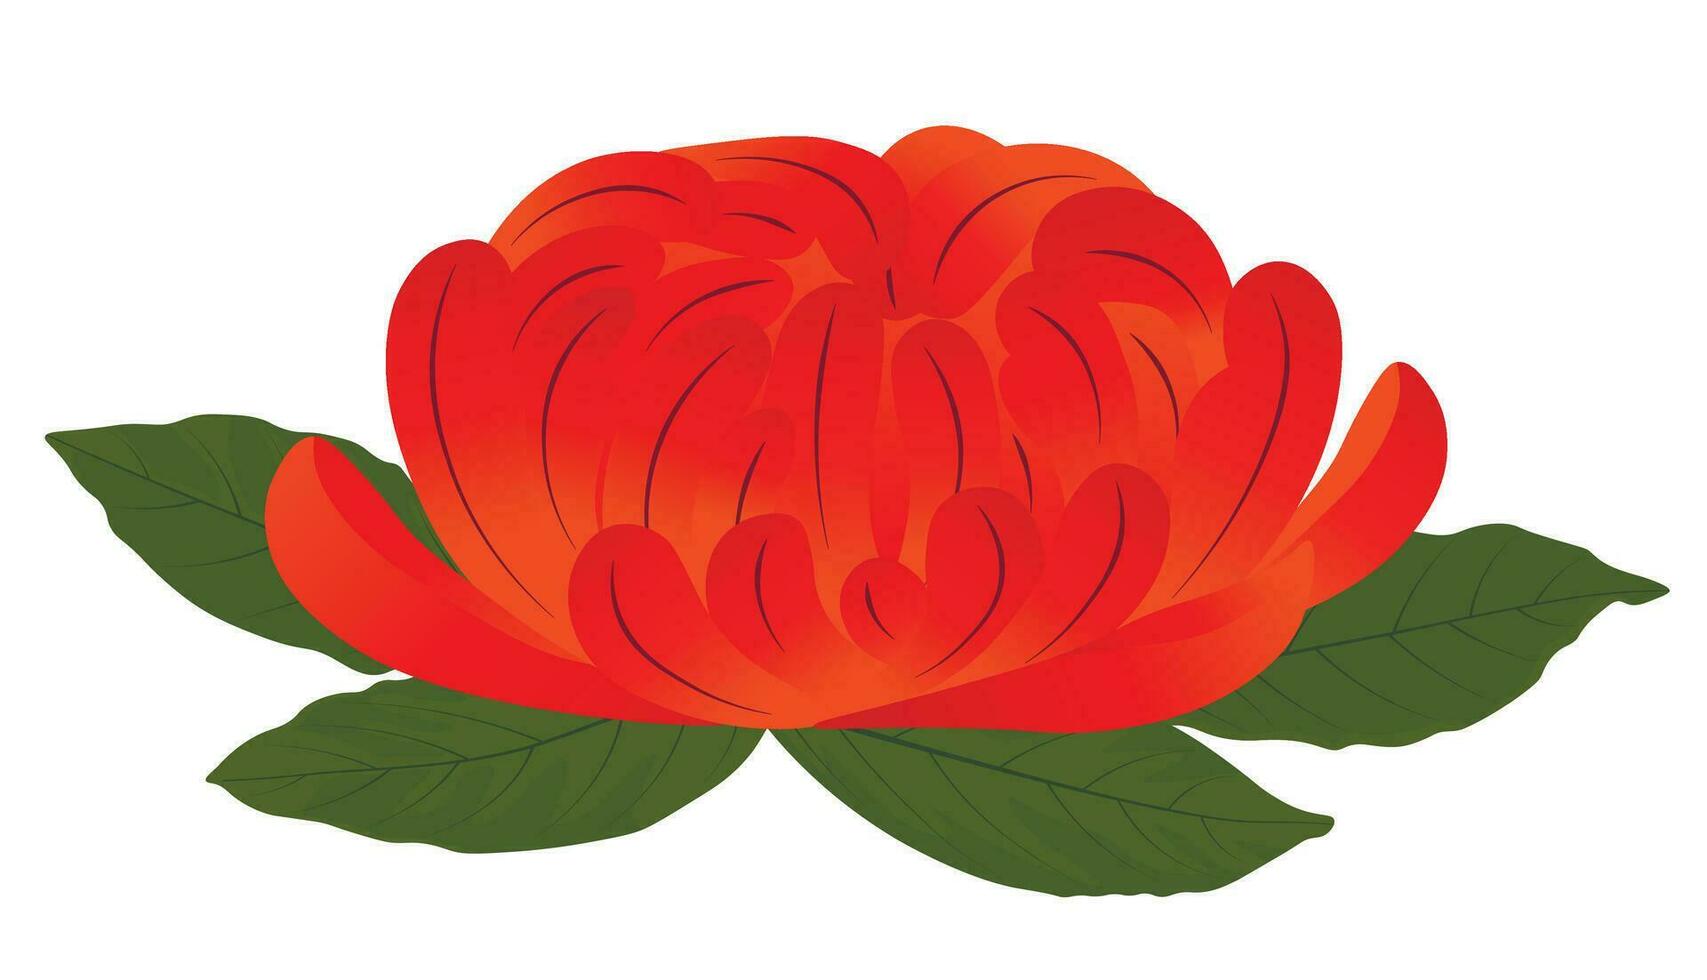 Chrysanthemum vector stock illustration.  A red peony bud. Isolated on white. Asian flower.